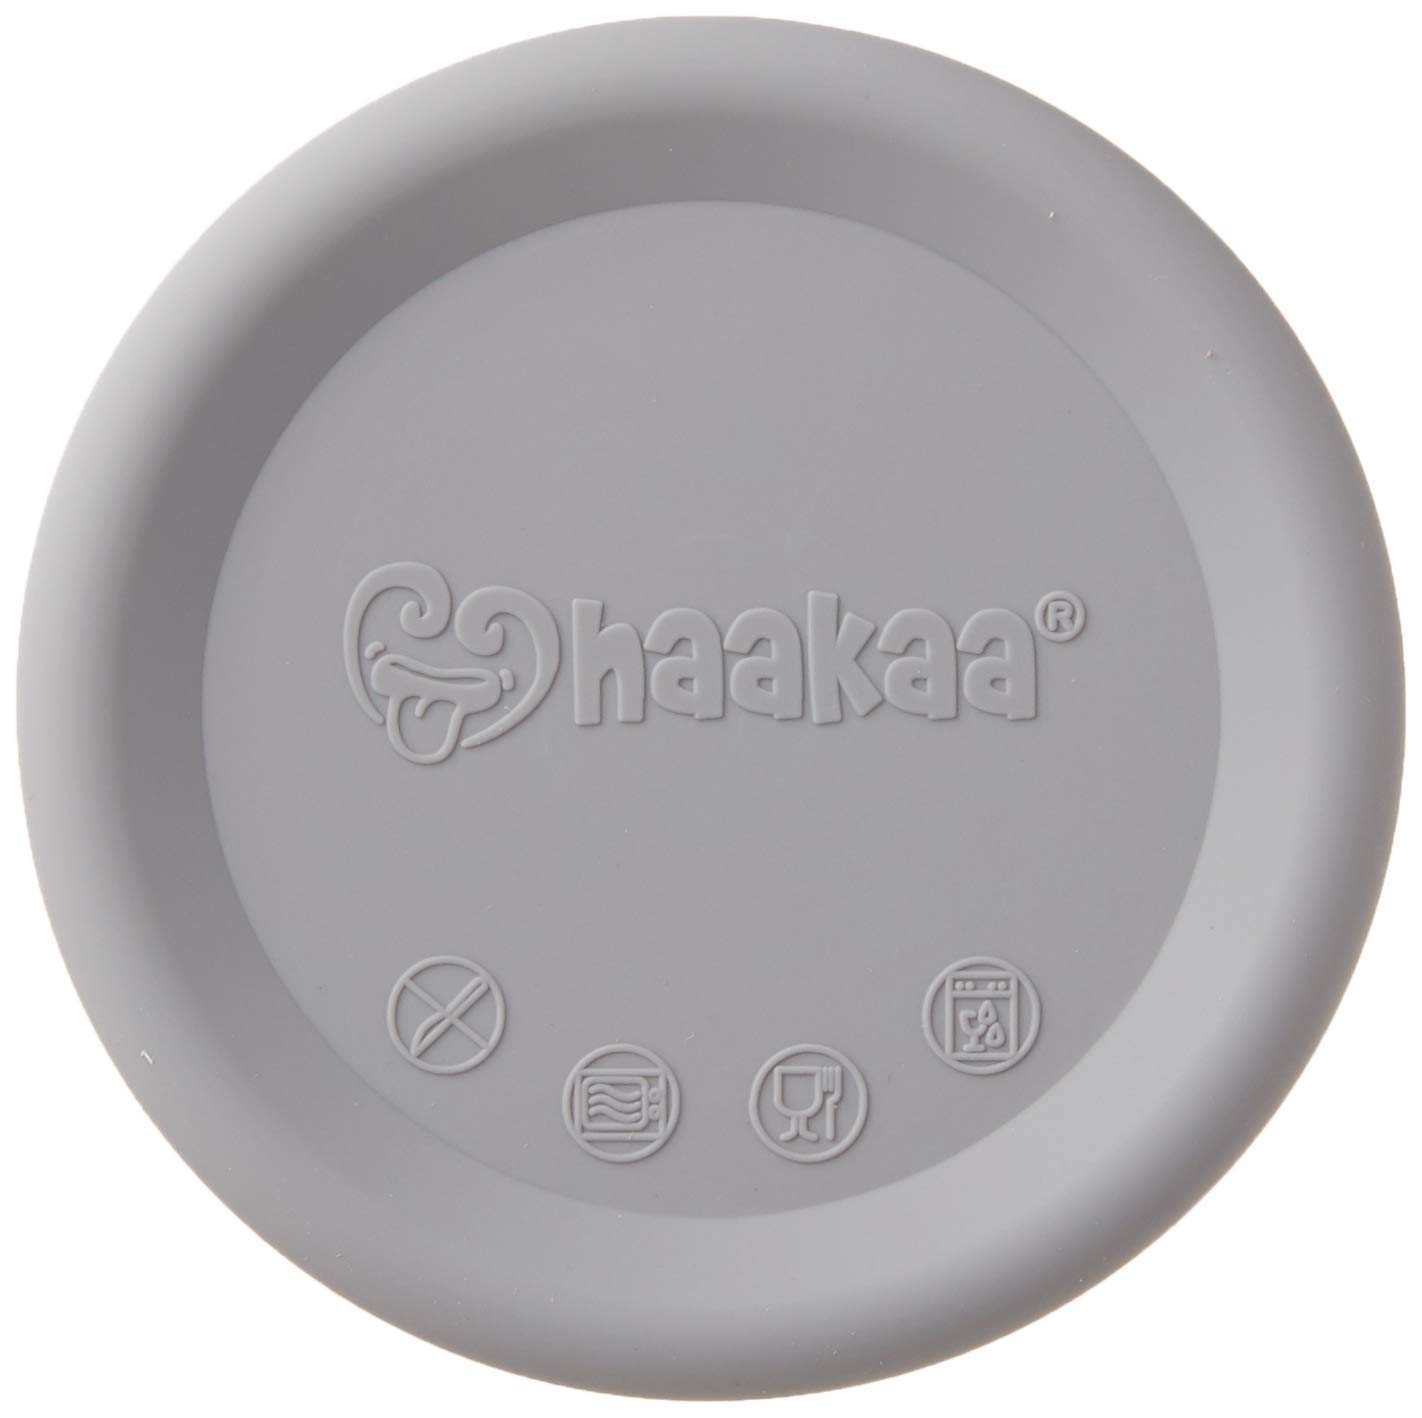 Haakaa Leak-Proof Silicone Cap, 1 pk, Fit All Haakaa Breast Pumps, BPA PVC and Phthalate Free 1 Count (Pack of 1)